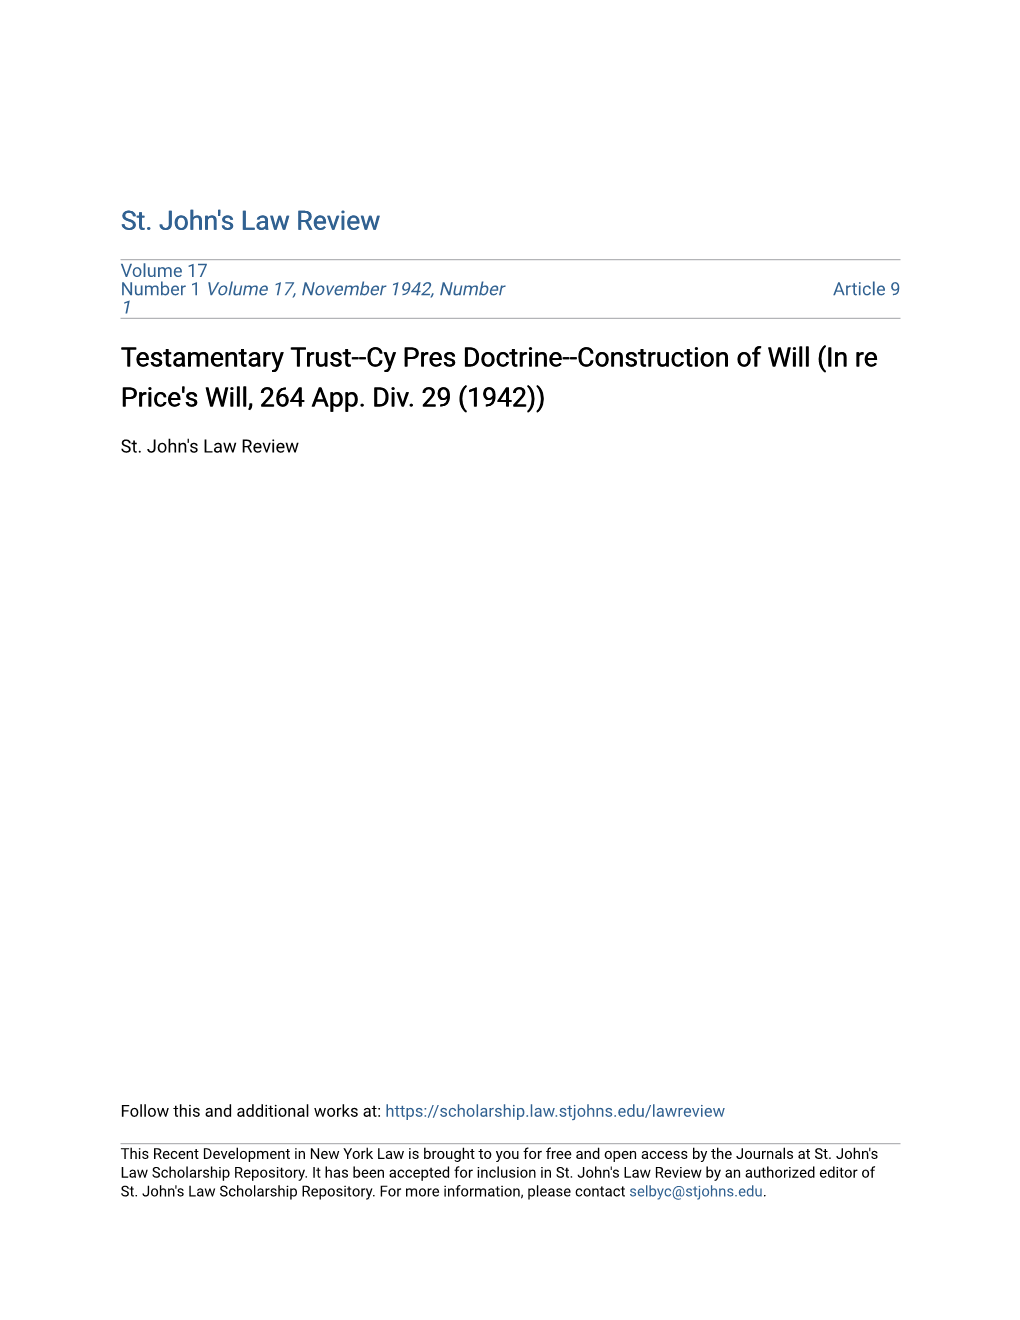 Cy Pres Doctrine--Construction of Will (In Re Price's Will, 264 App